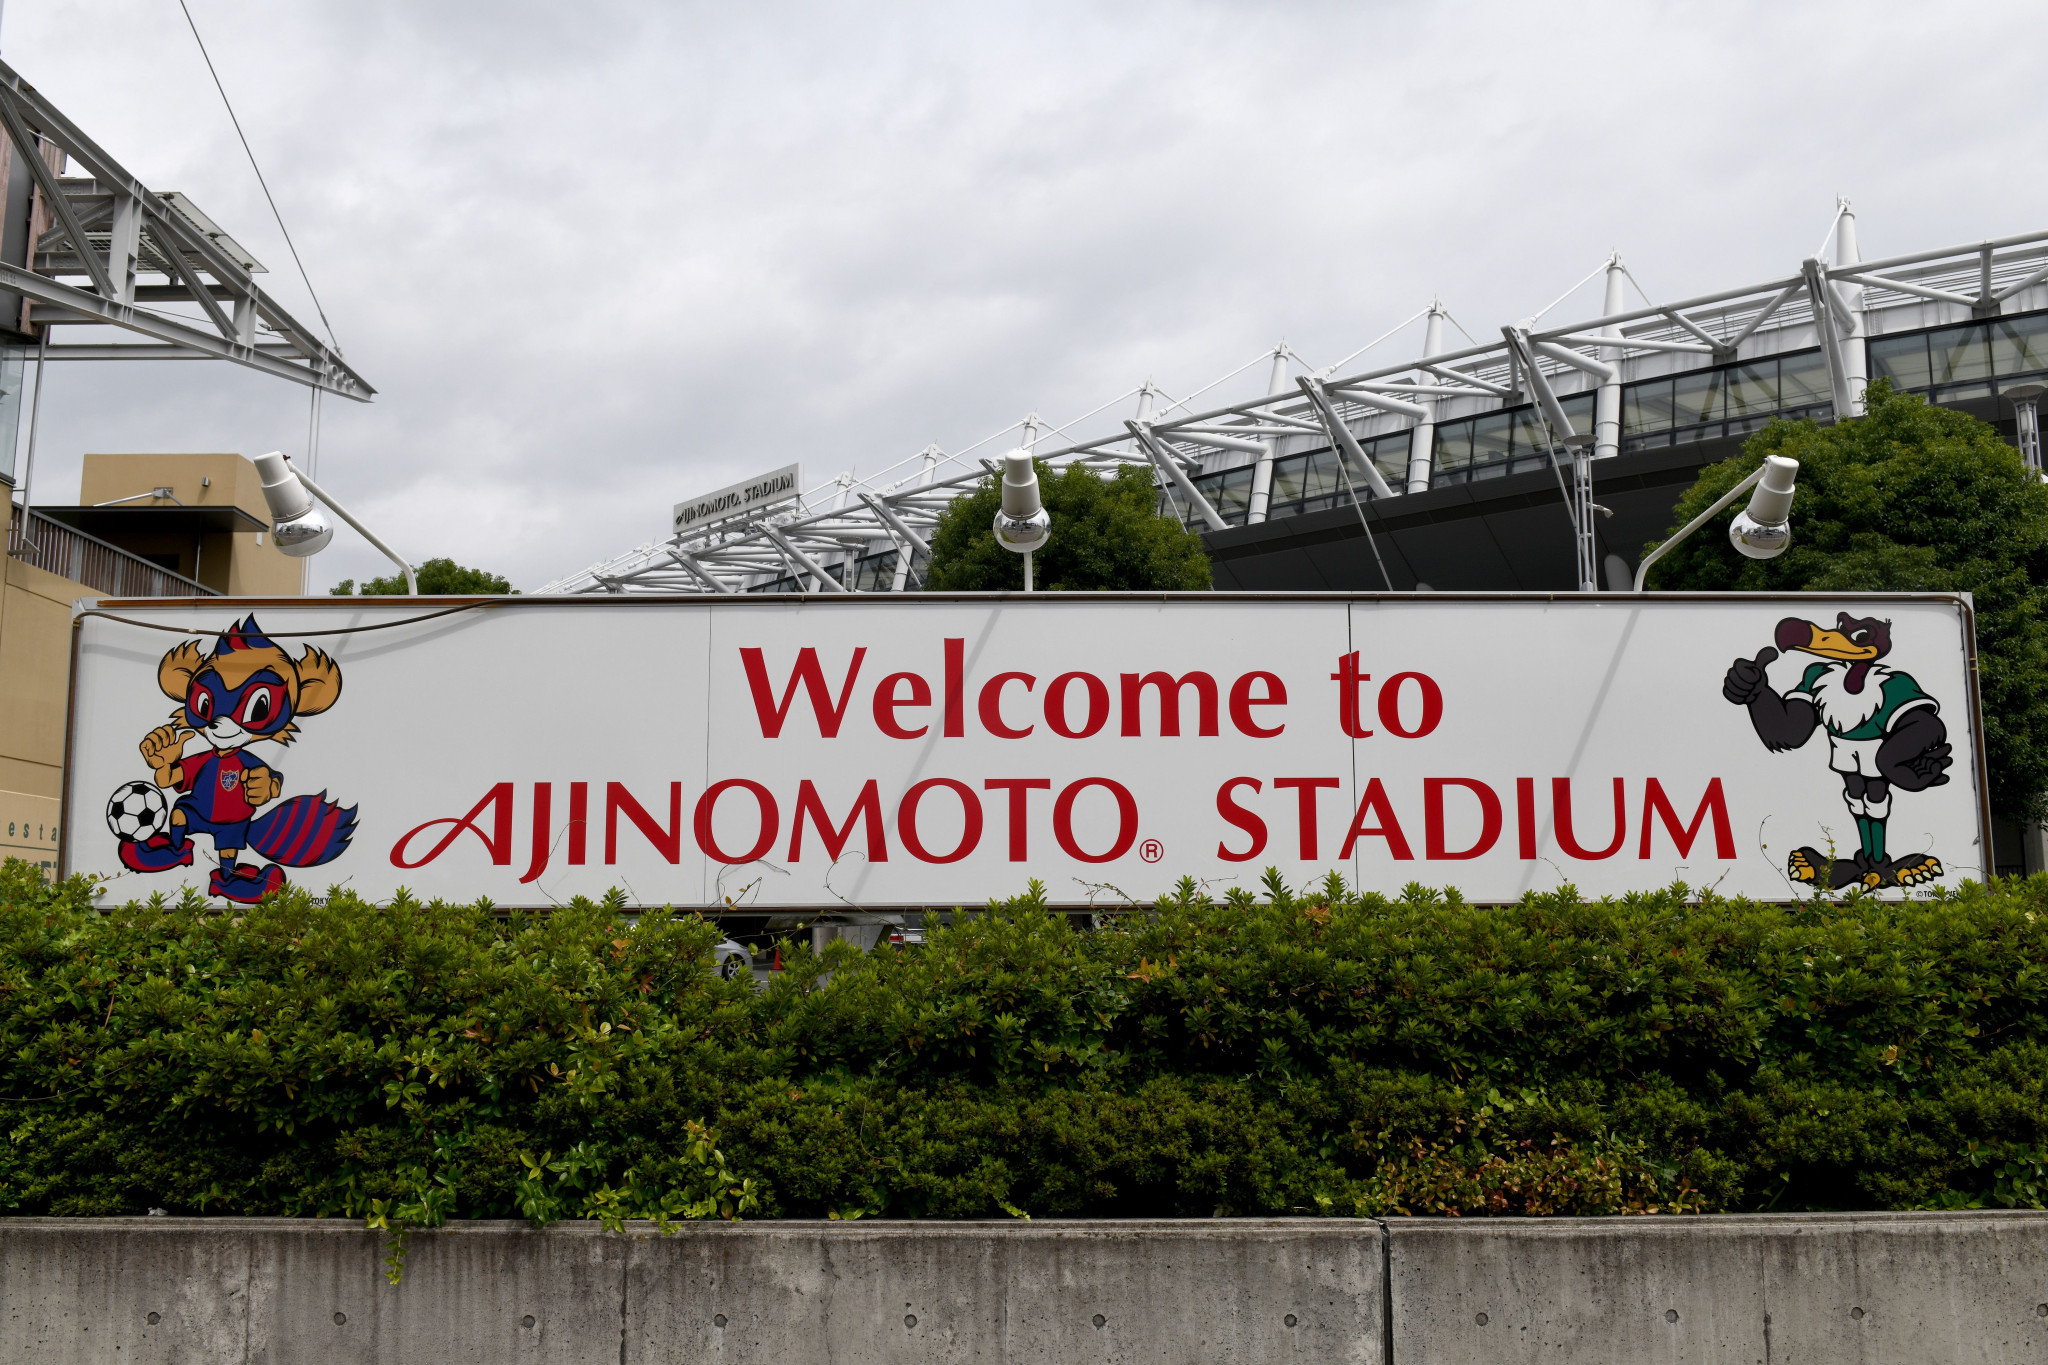 Ajinomoto Stadium will host the UIPM World Cup final next year in preparation for the Games ©Getty Images